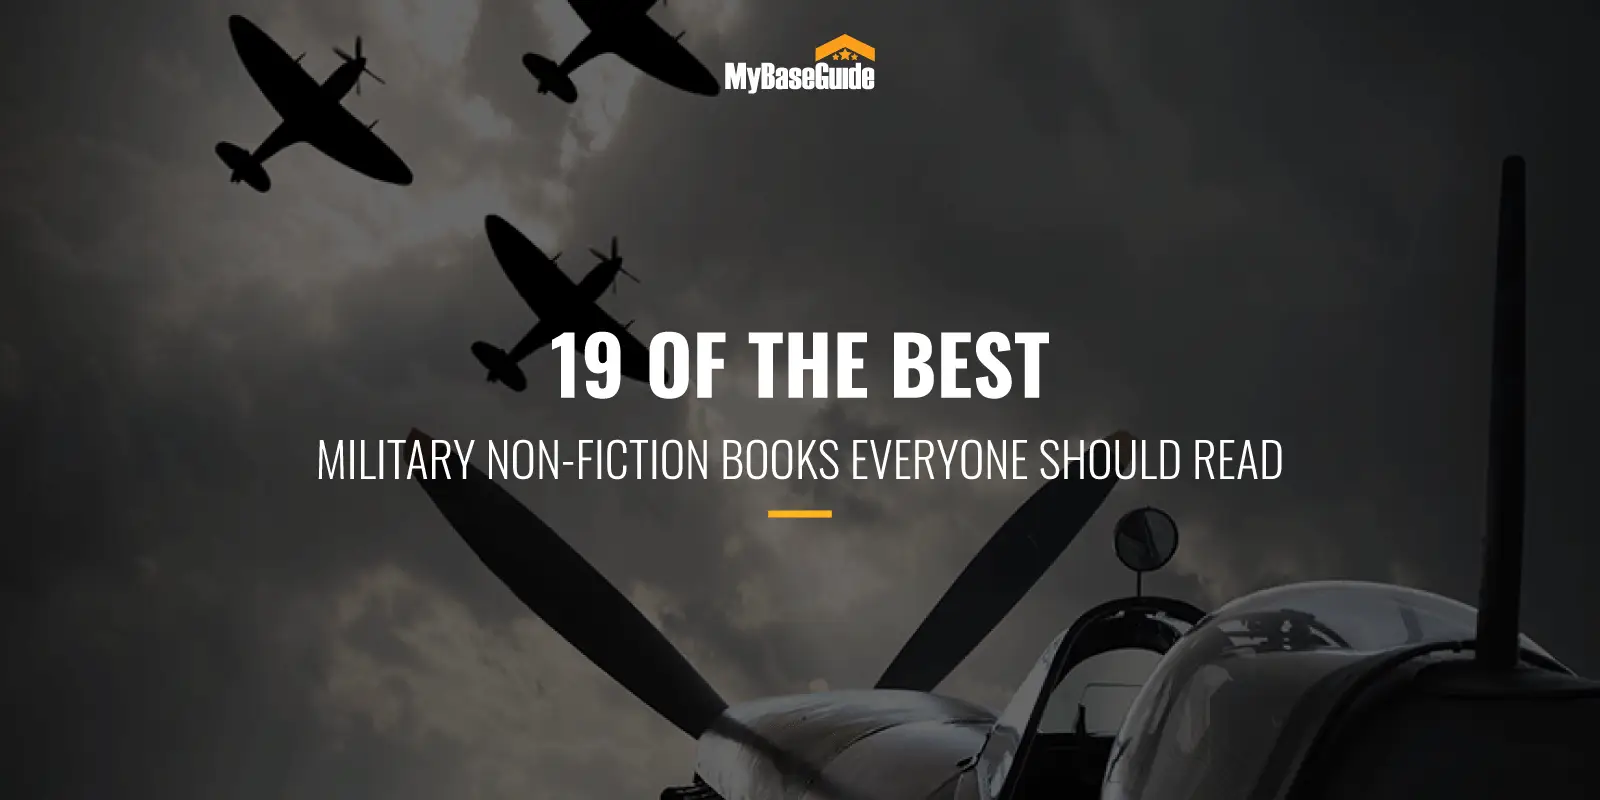 19 of the Best Military Non-Fiction Books Everyone Should Read